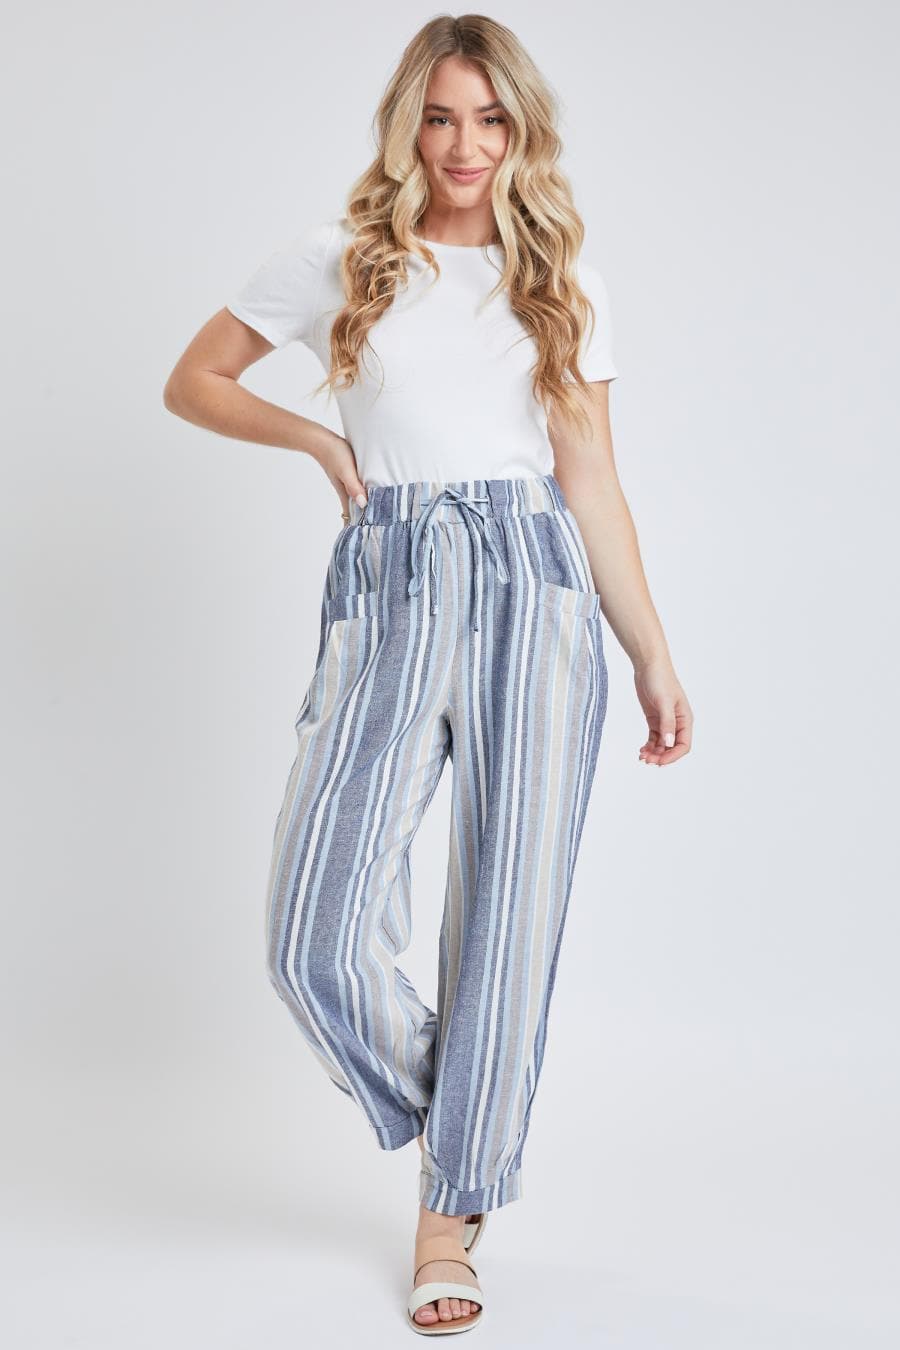 Women's Linen Joggers With Banded Hem